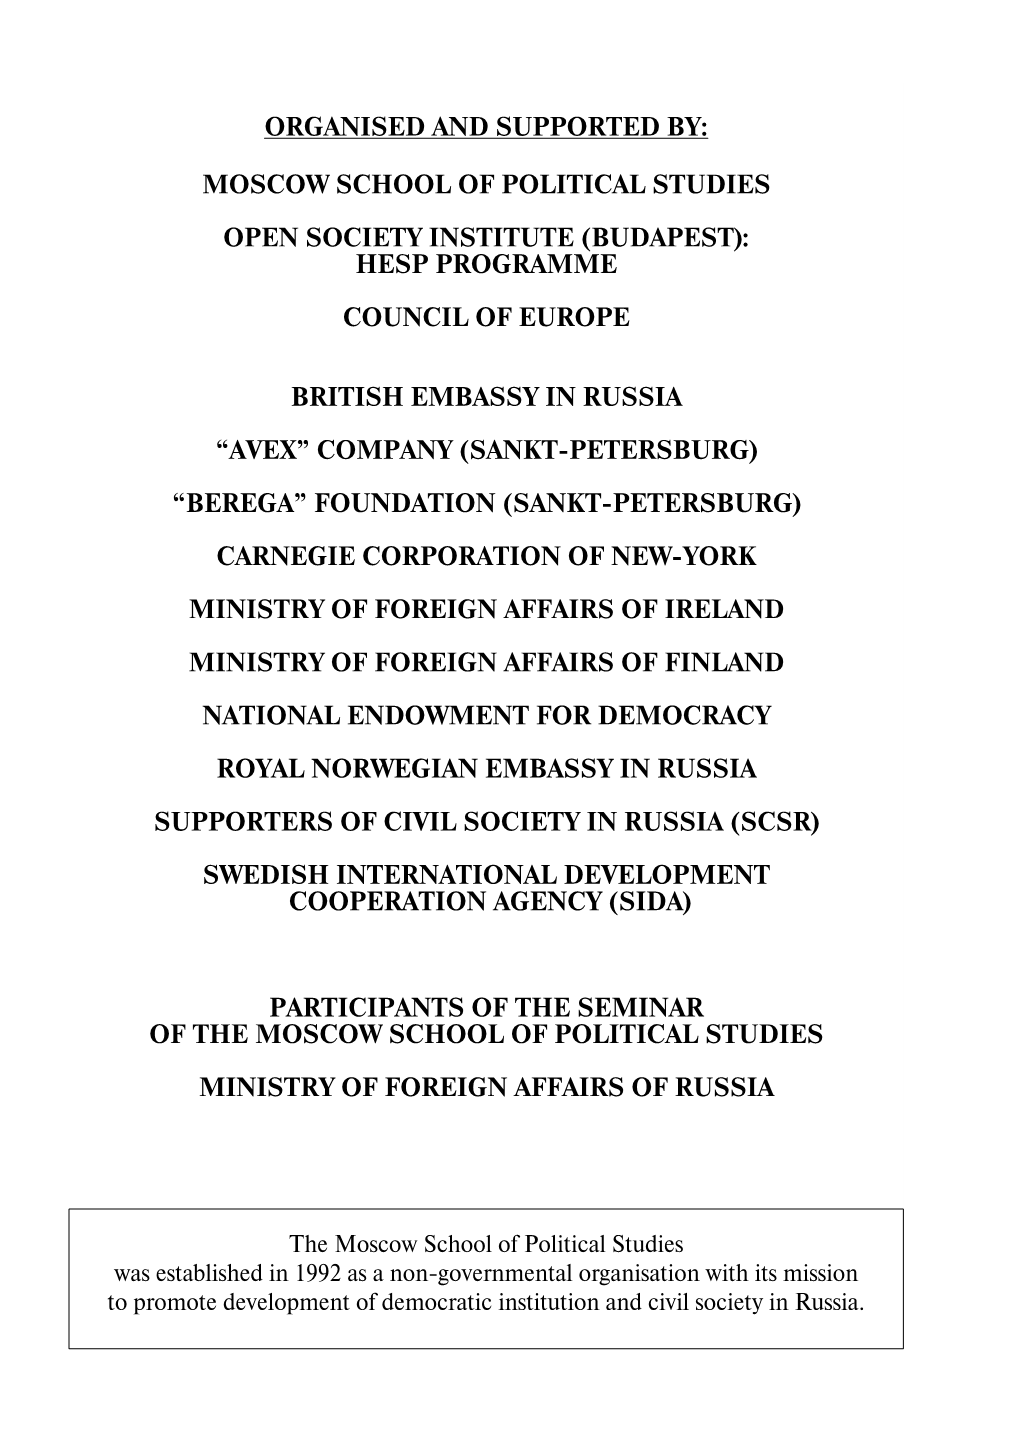 Moscow School of Political Studies Open Society Institute (Budapest): Hesp Programme Council of Europe